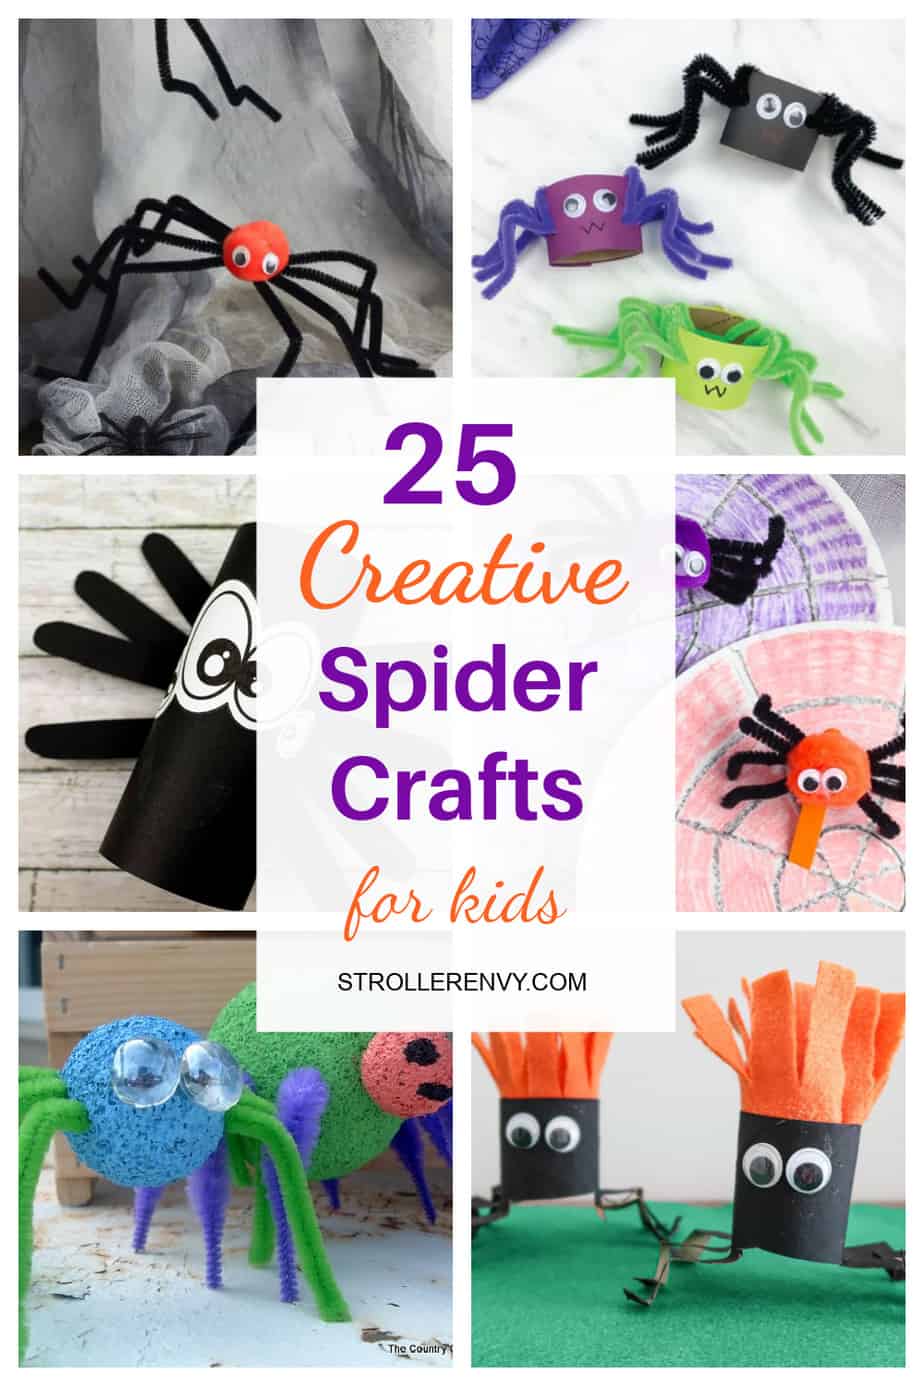 25 Creative Spider Crafts for Kids they Will Love Making